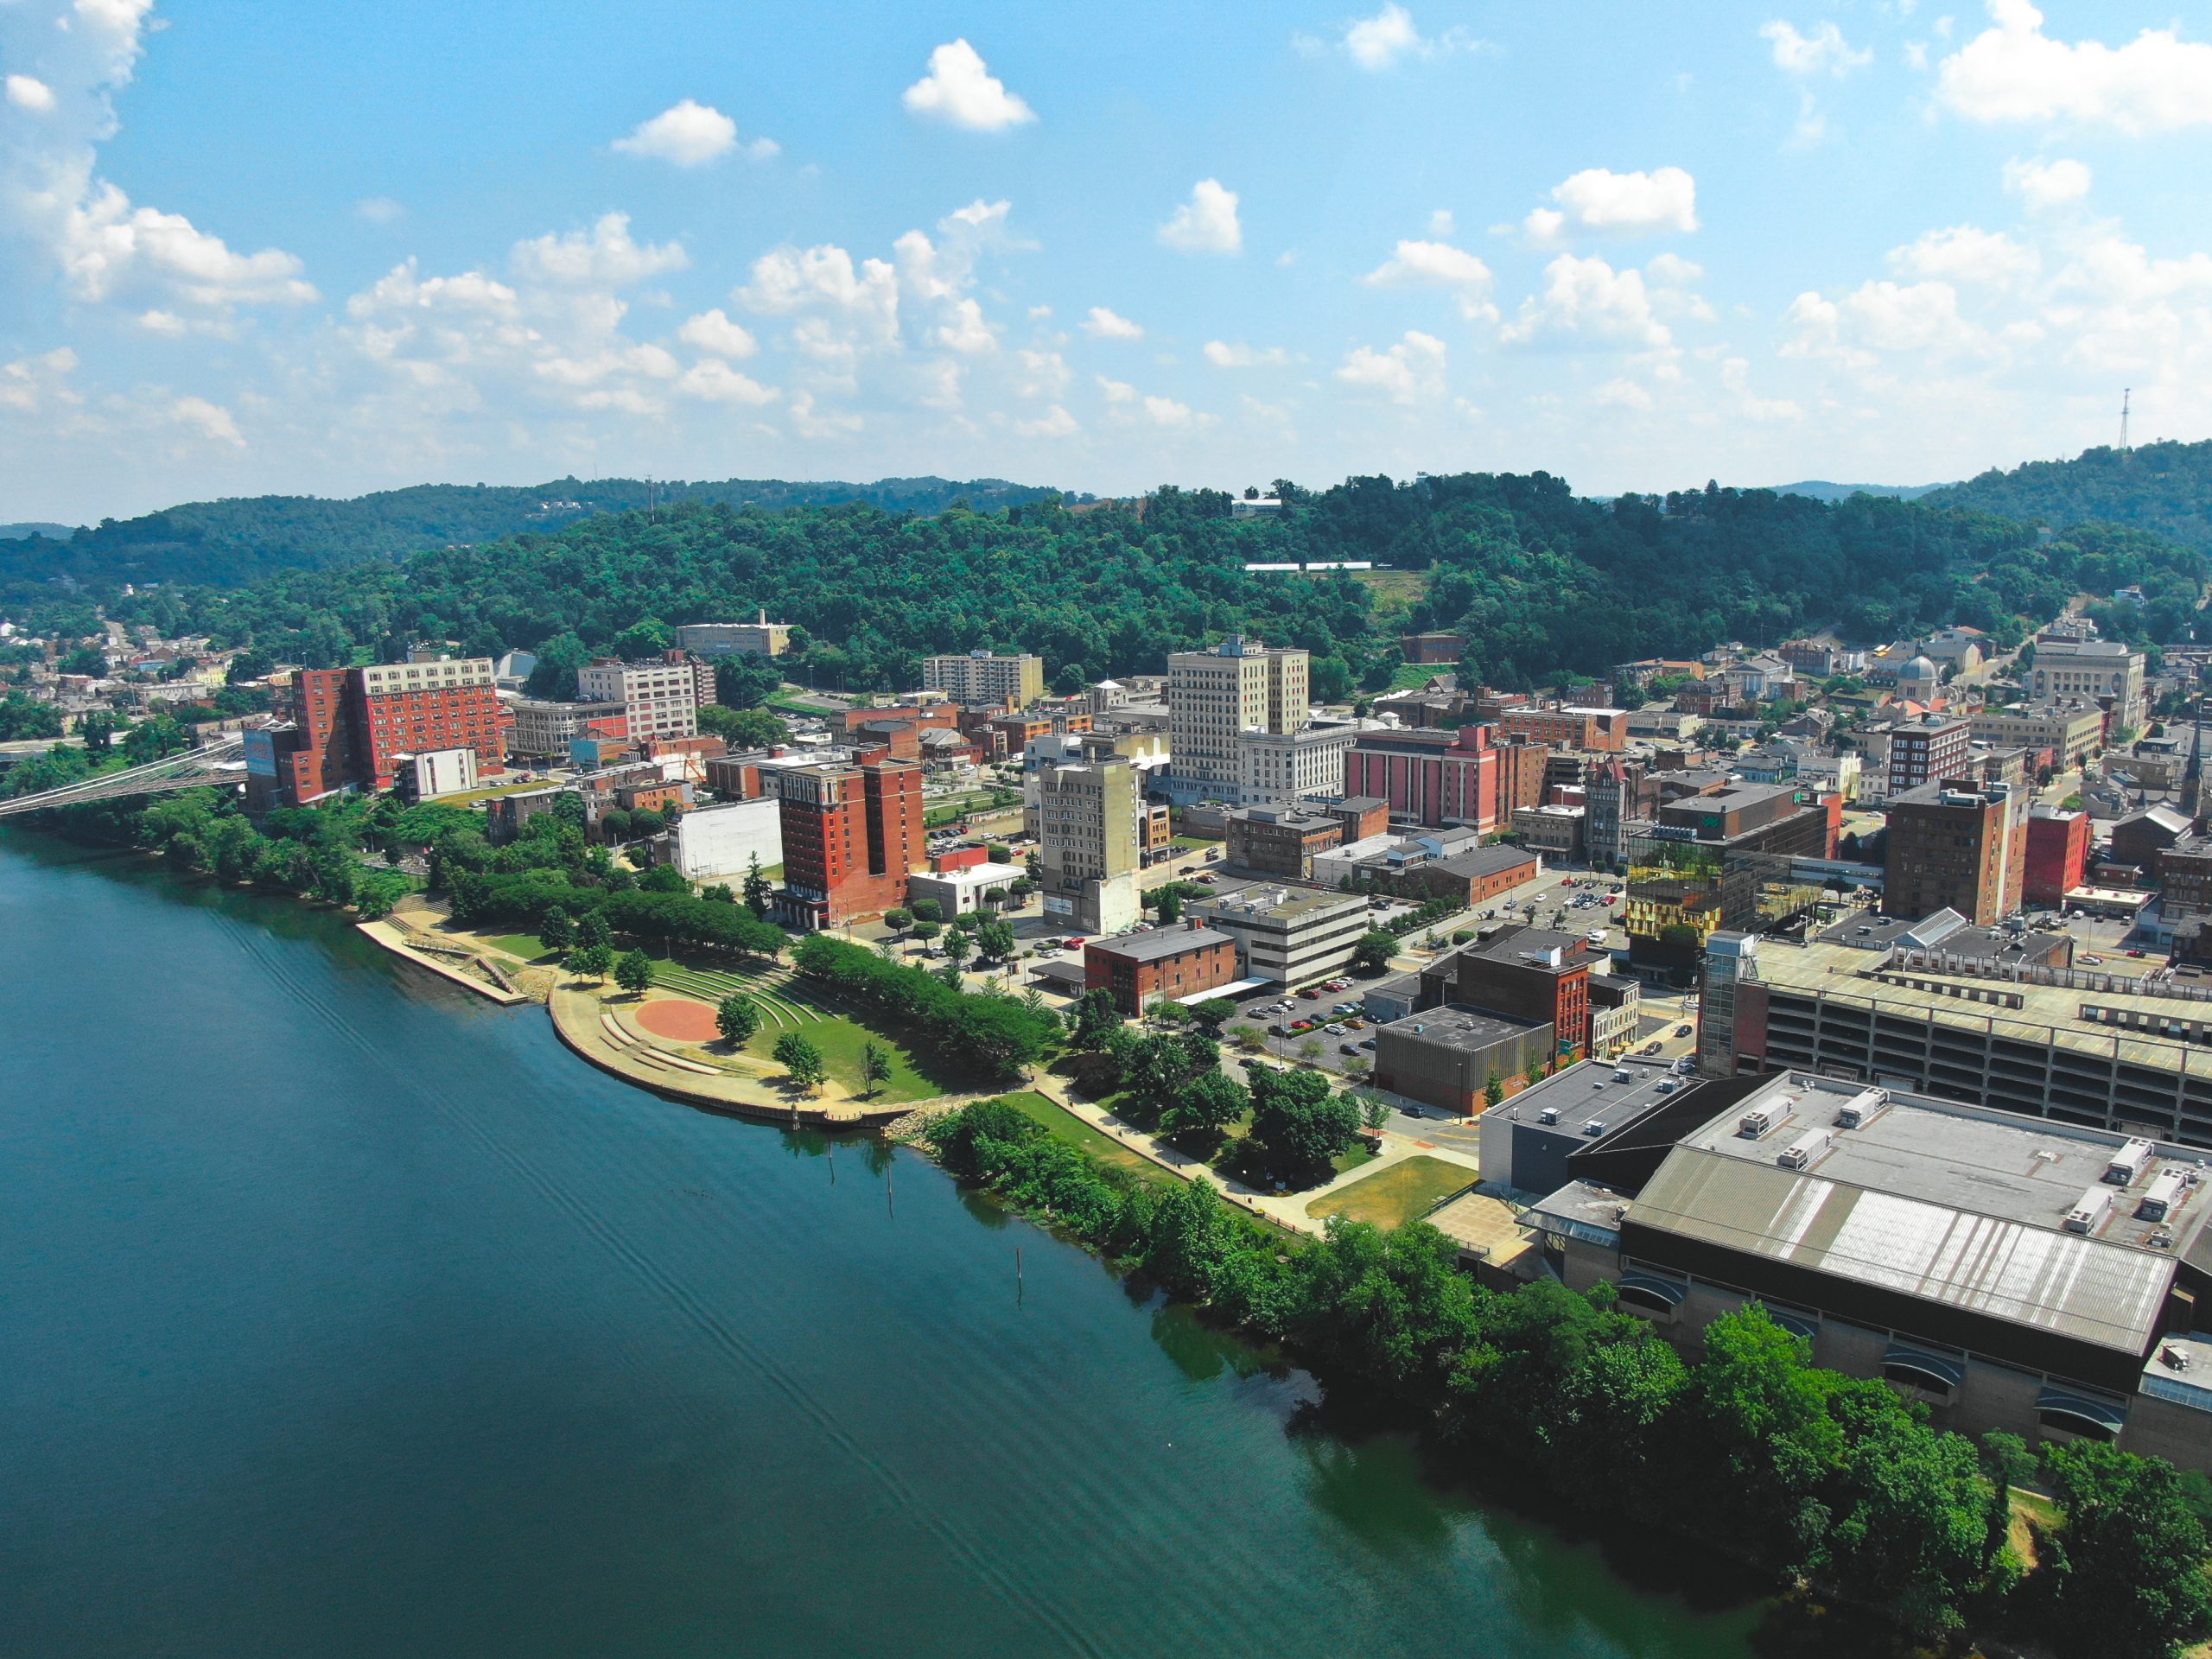 Wheeling’s Downtown Historic District Expanded